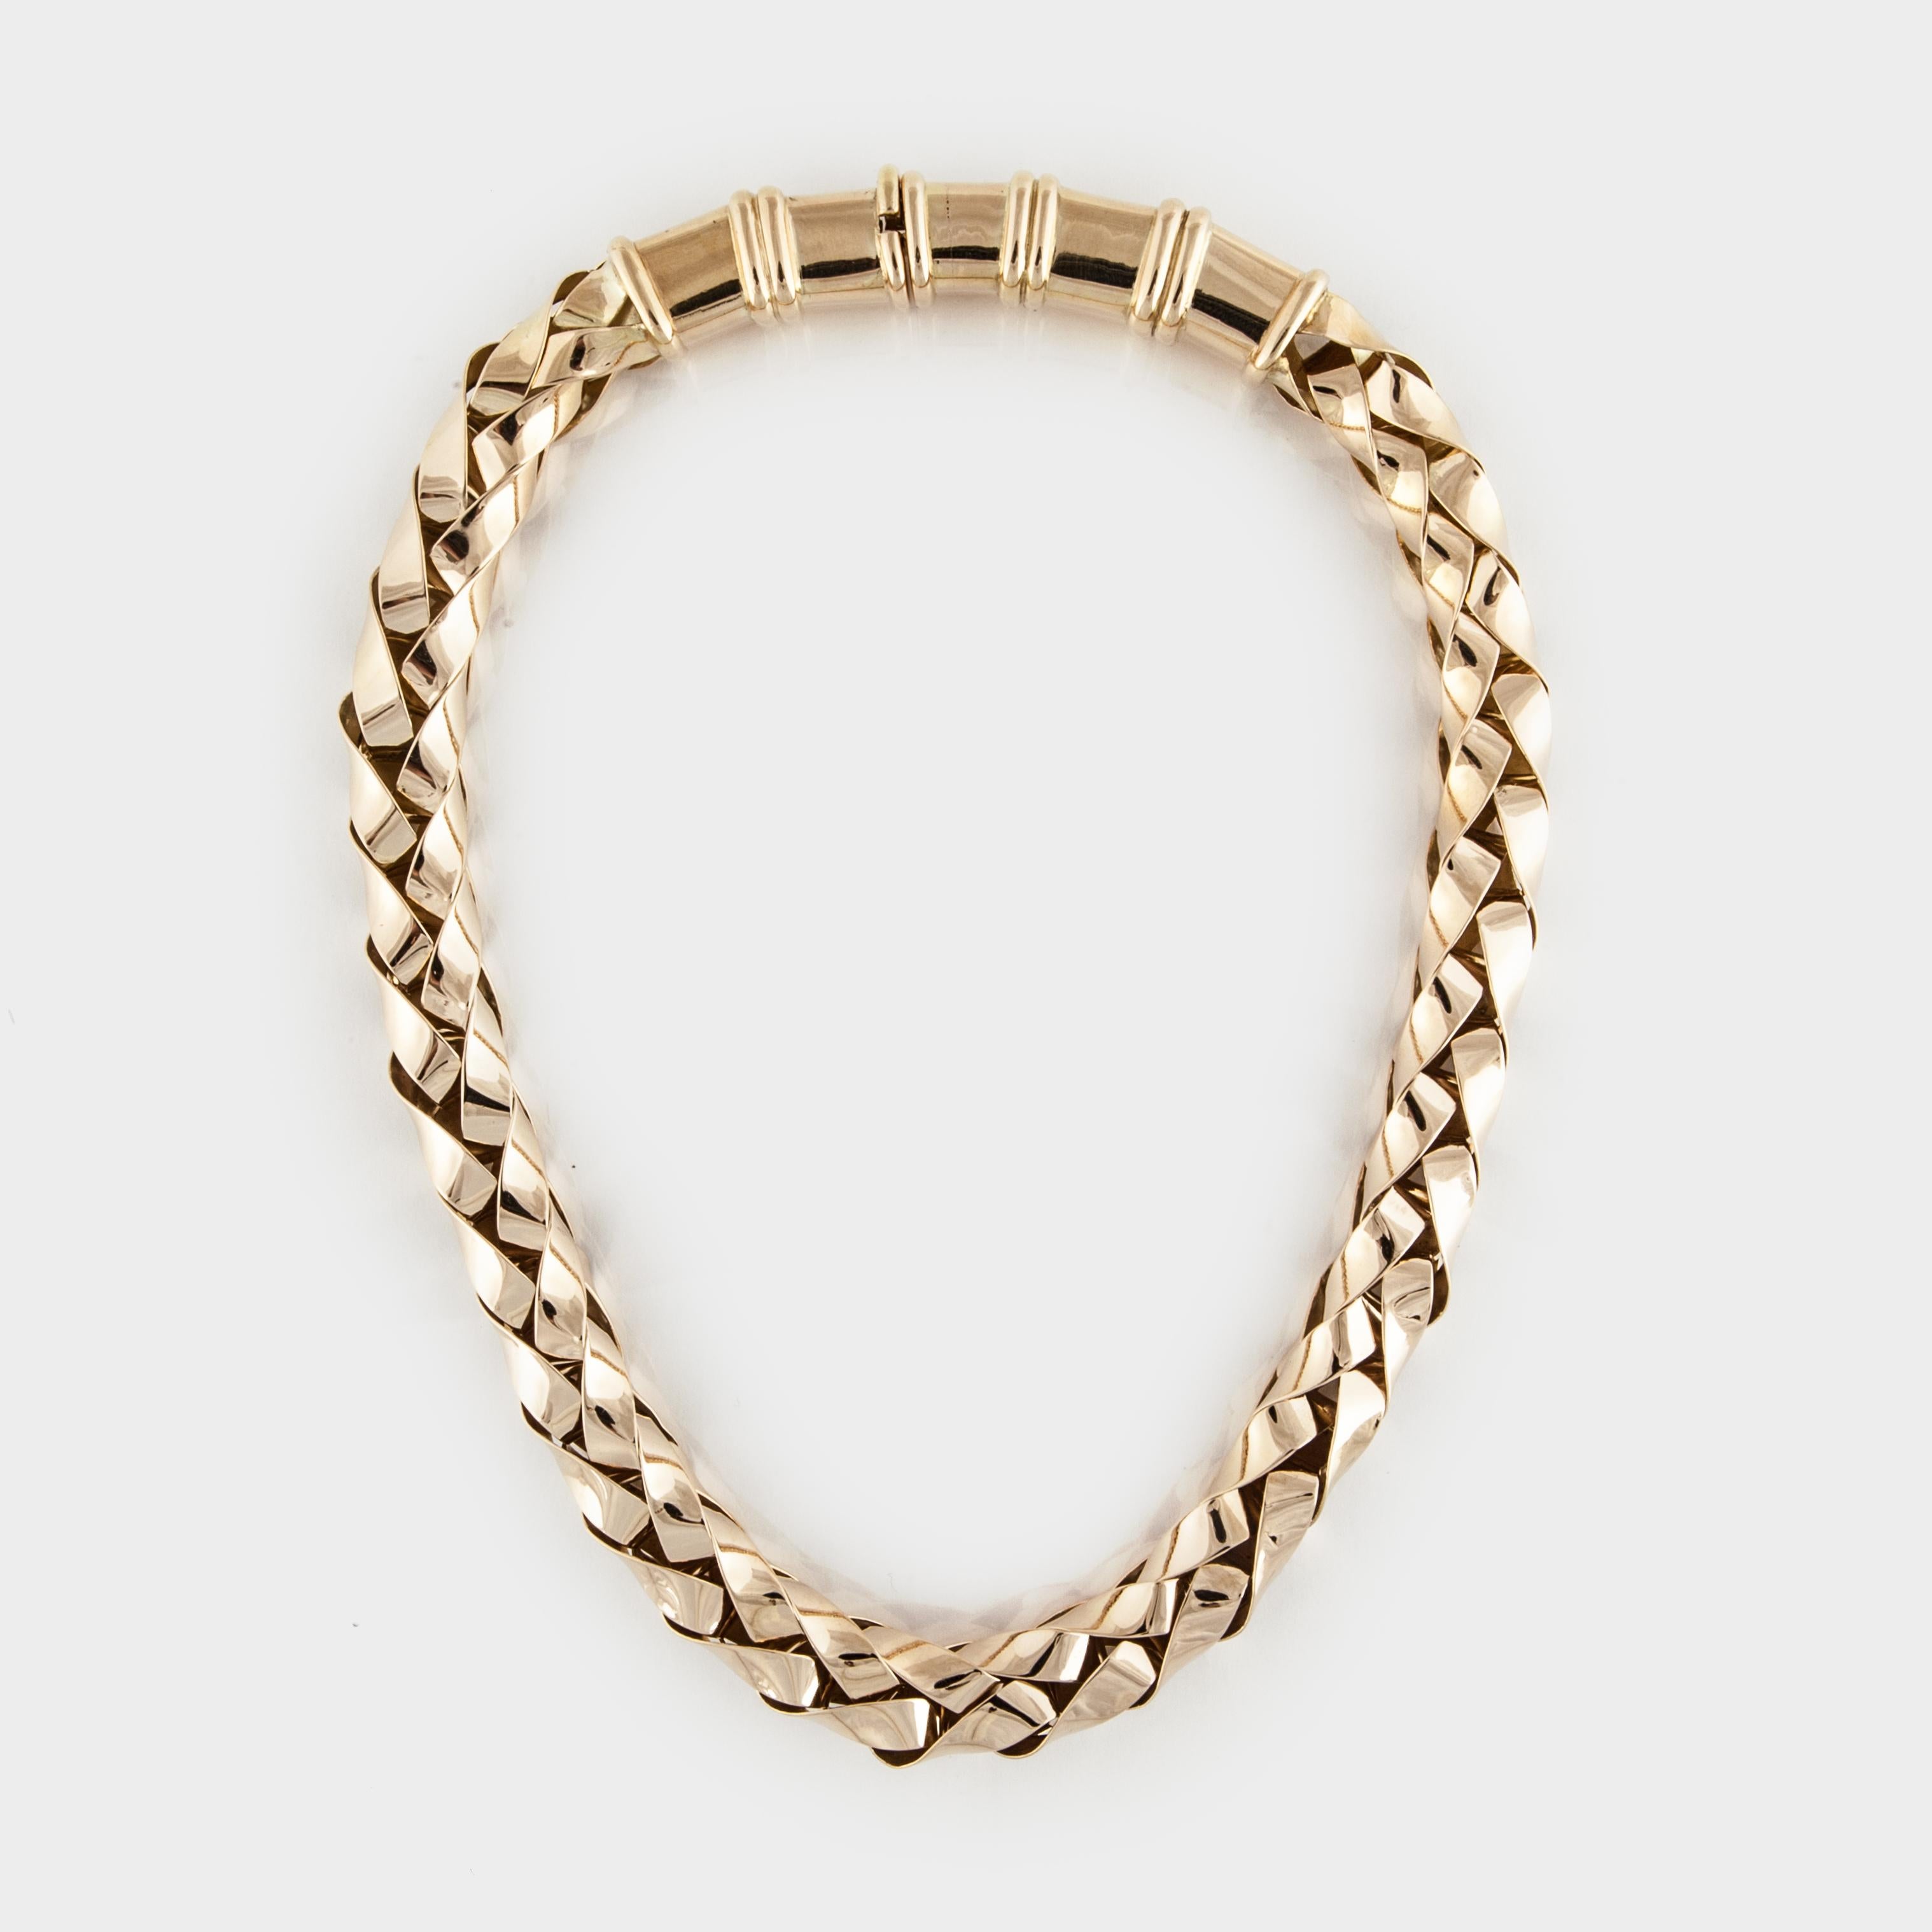 18K yellow gold necklace in a woven style.  It is tubular with a very heavy tongue closure and latch safety.  Measures 18 inches long and 7/16 inches wide.  Bold piece.